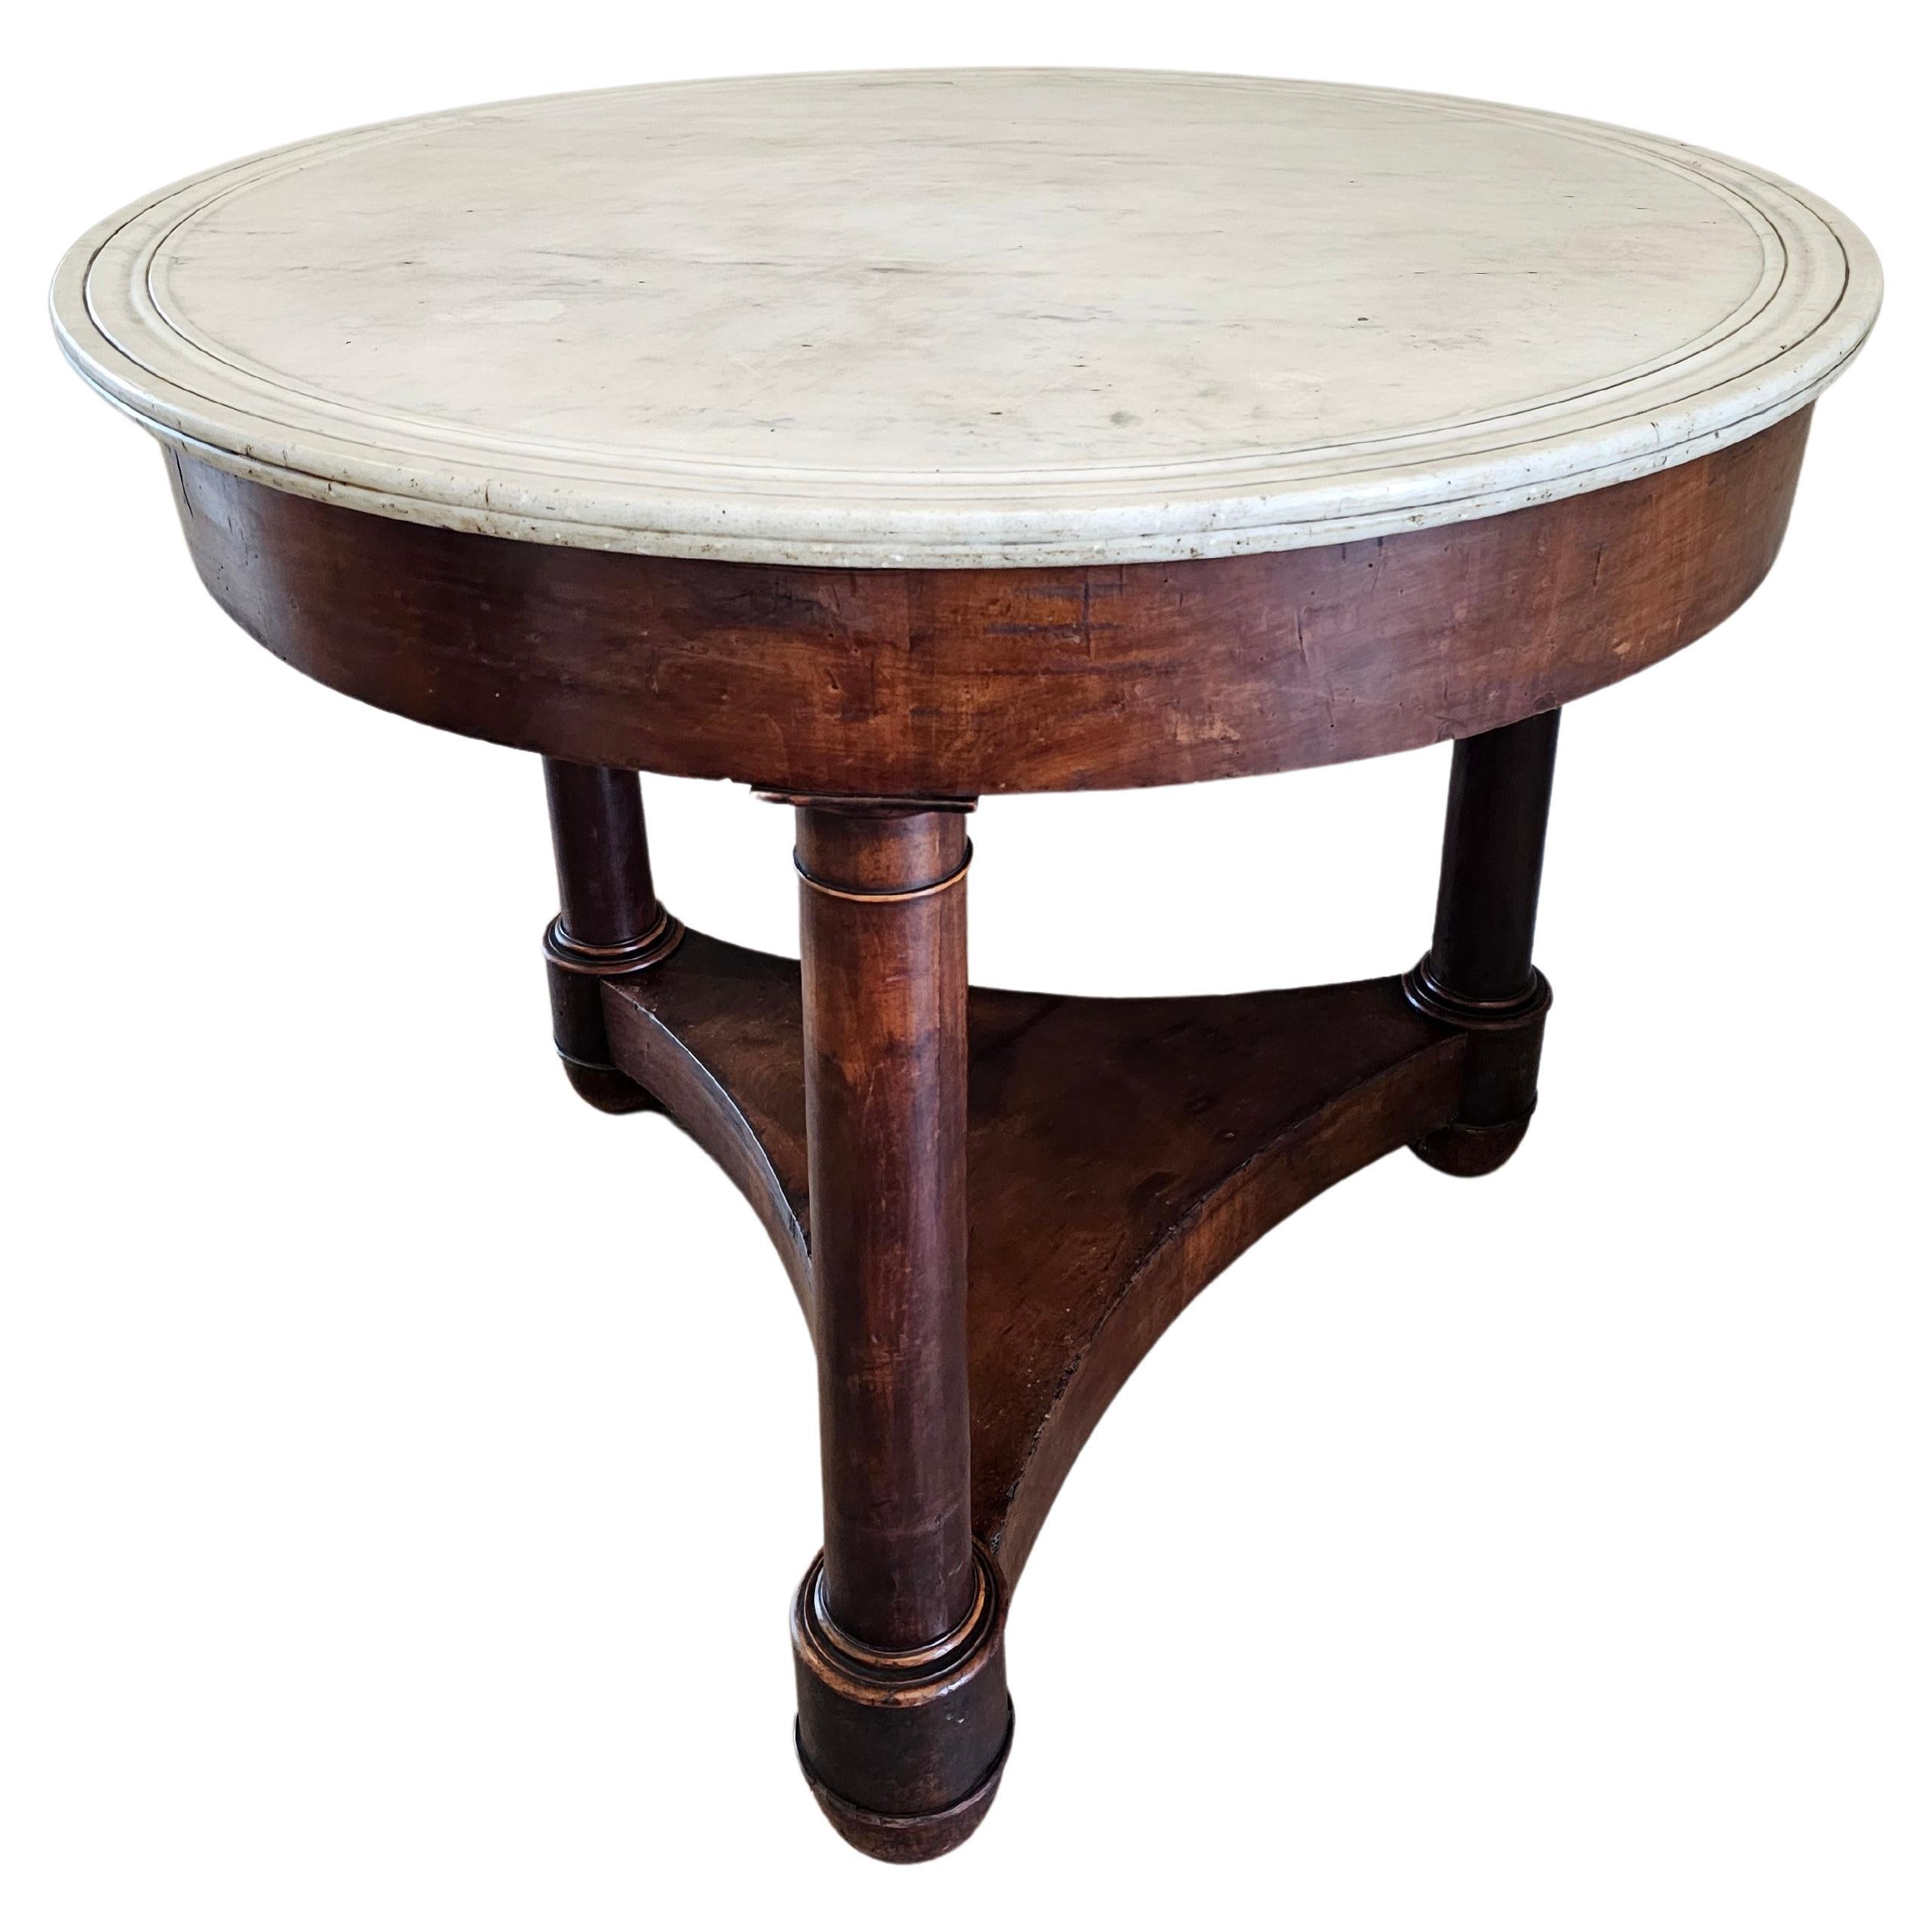 French Empire Period Antique Mahogany Pedestal Center Table Gueridon  For Sale